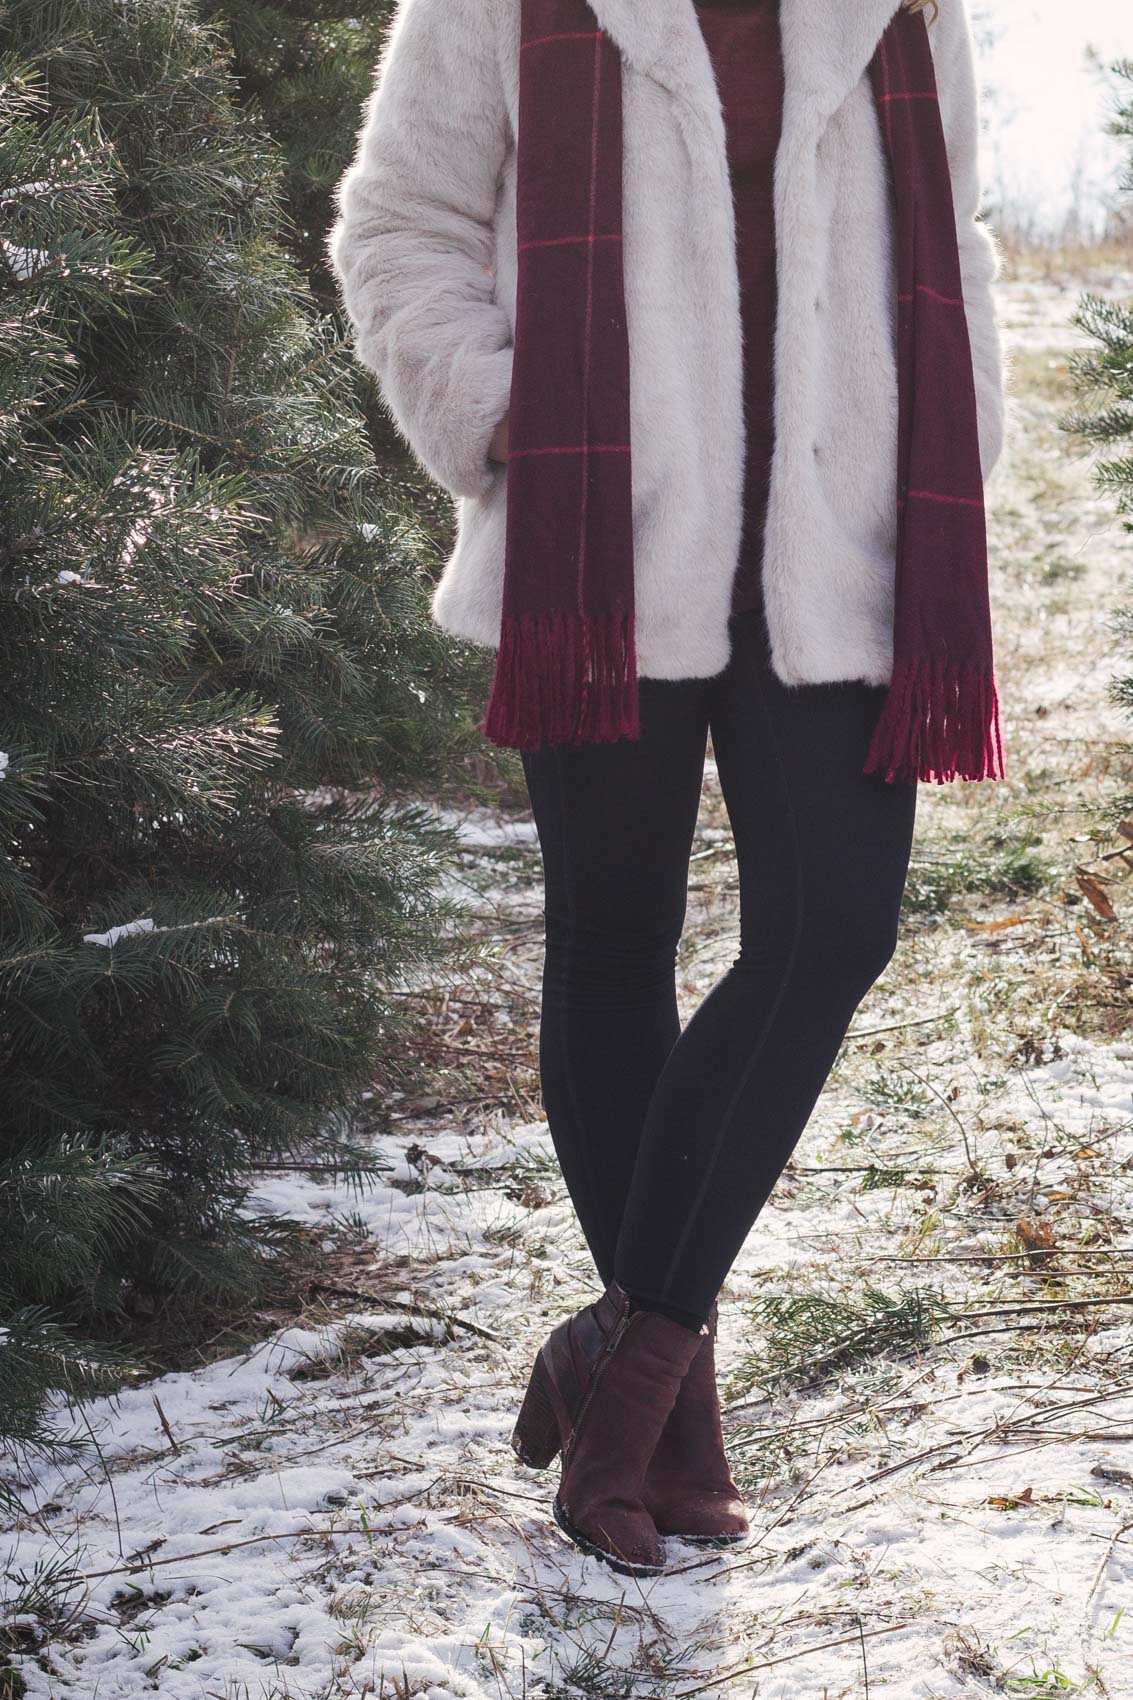 A note on holiday traditions and traditions along with a $50 luxurious faux fur coat outfit. Plus, a few more fur coats for women that are all under $200!